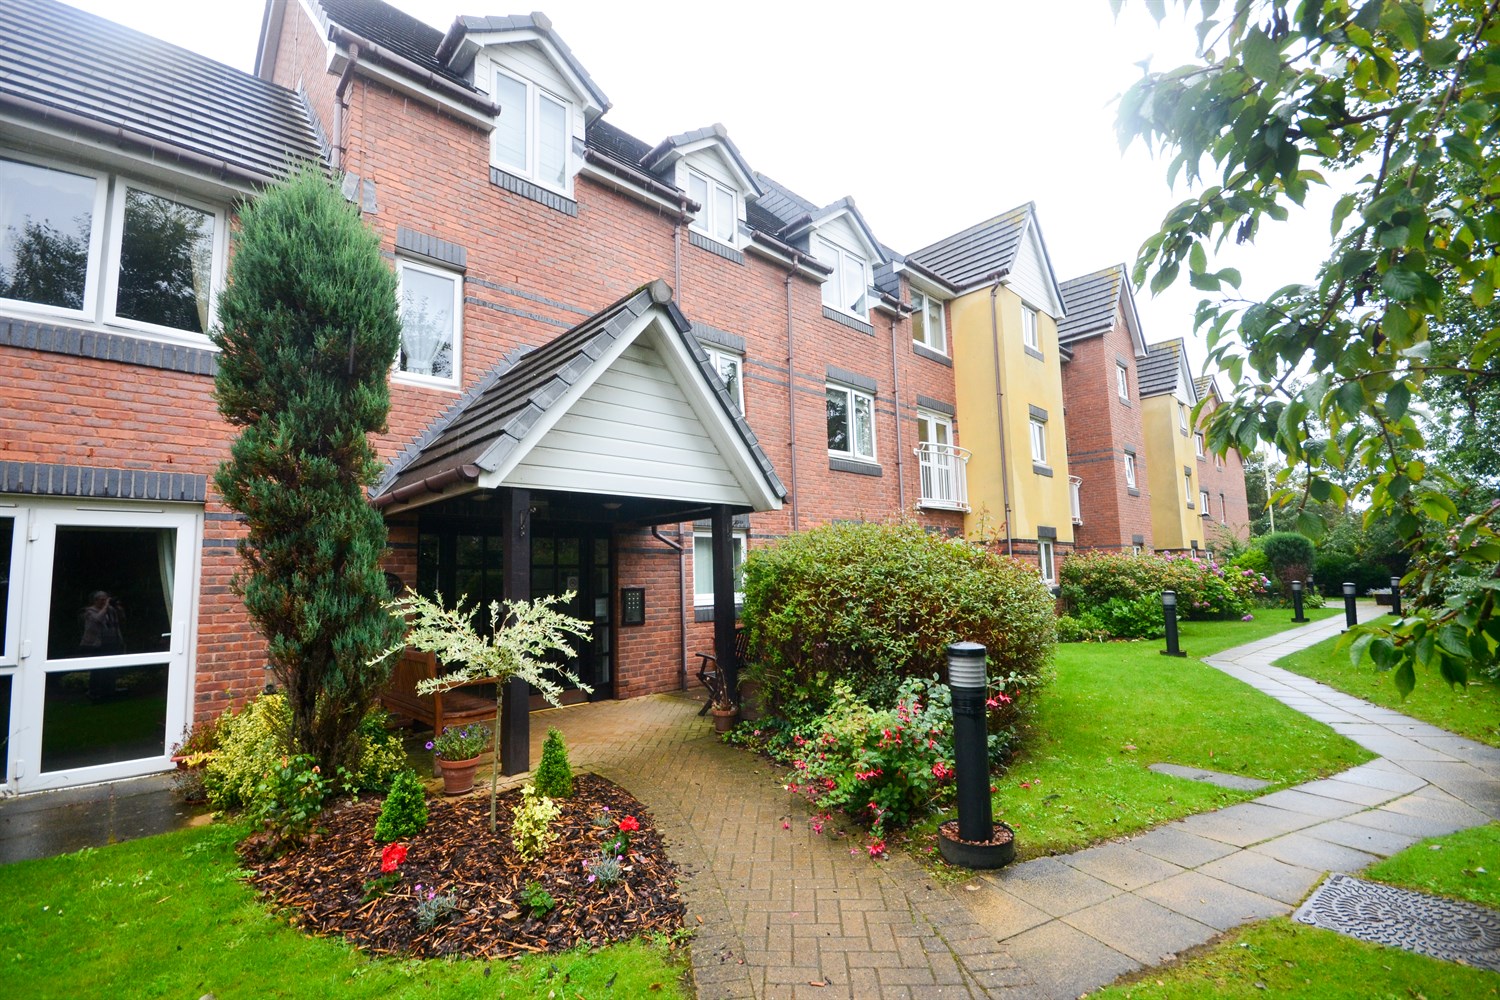 1 bed flat for sale in Willow Bank Court, East Boldon - Property Image 1